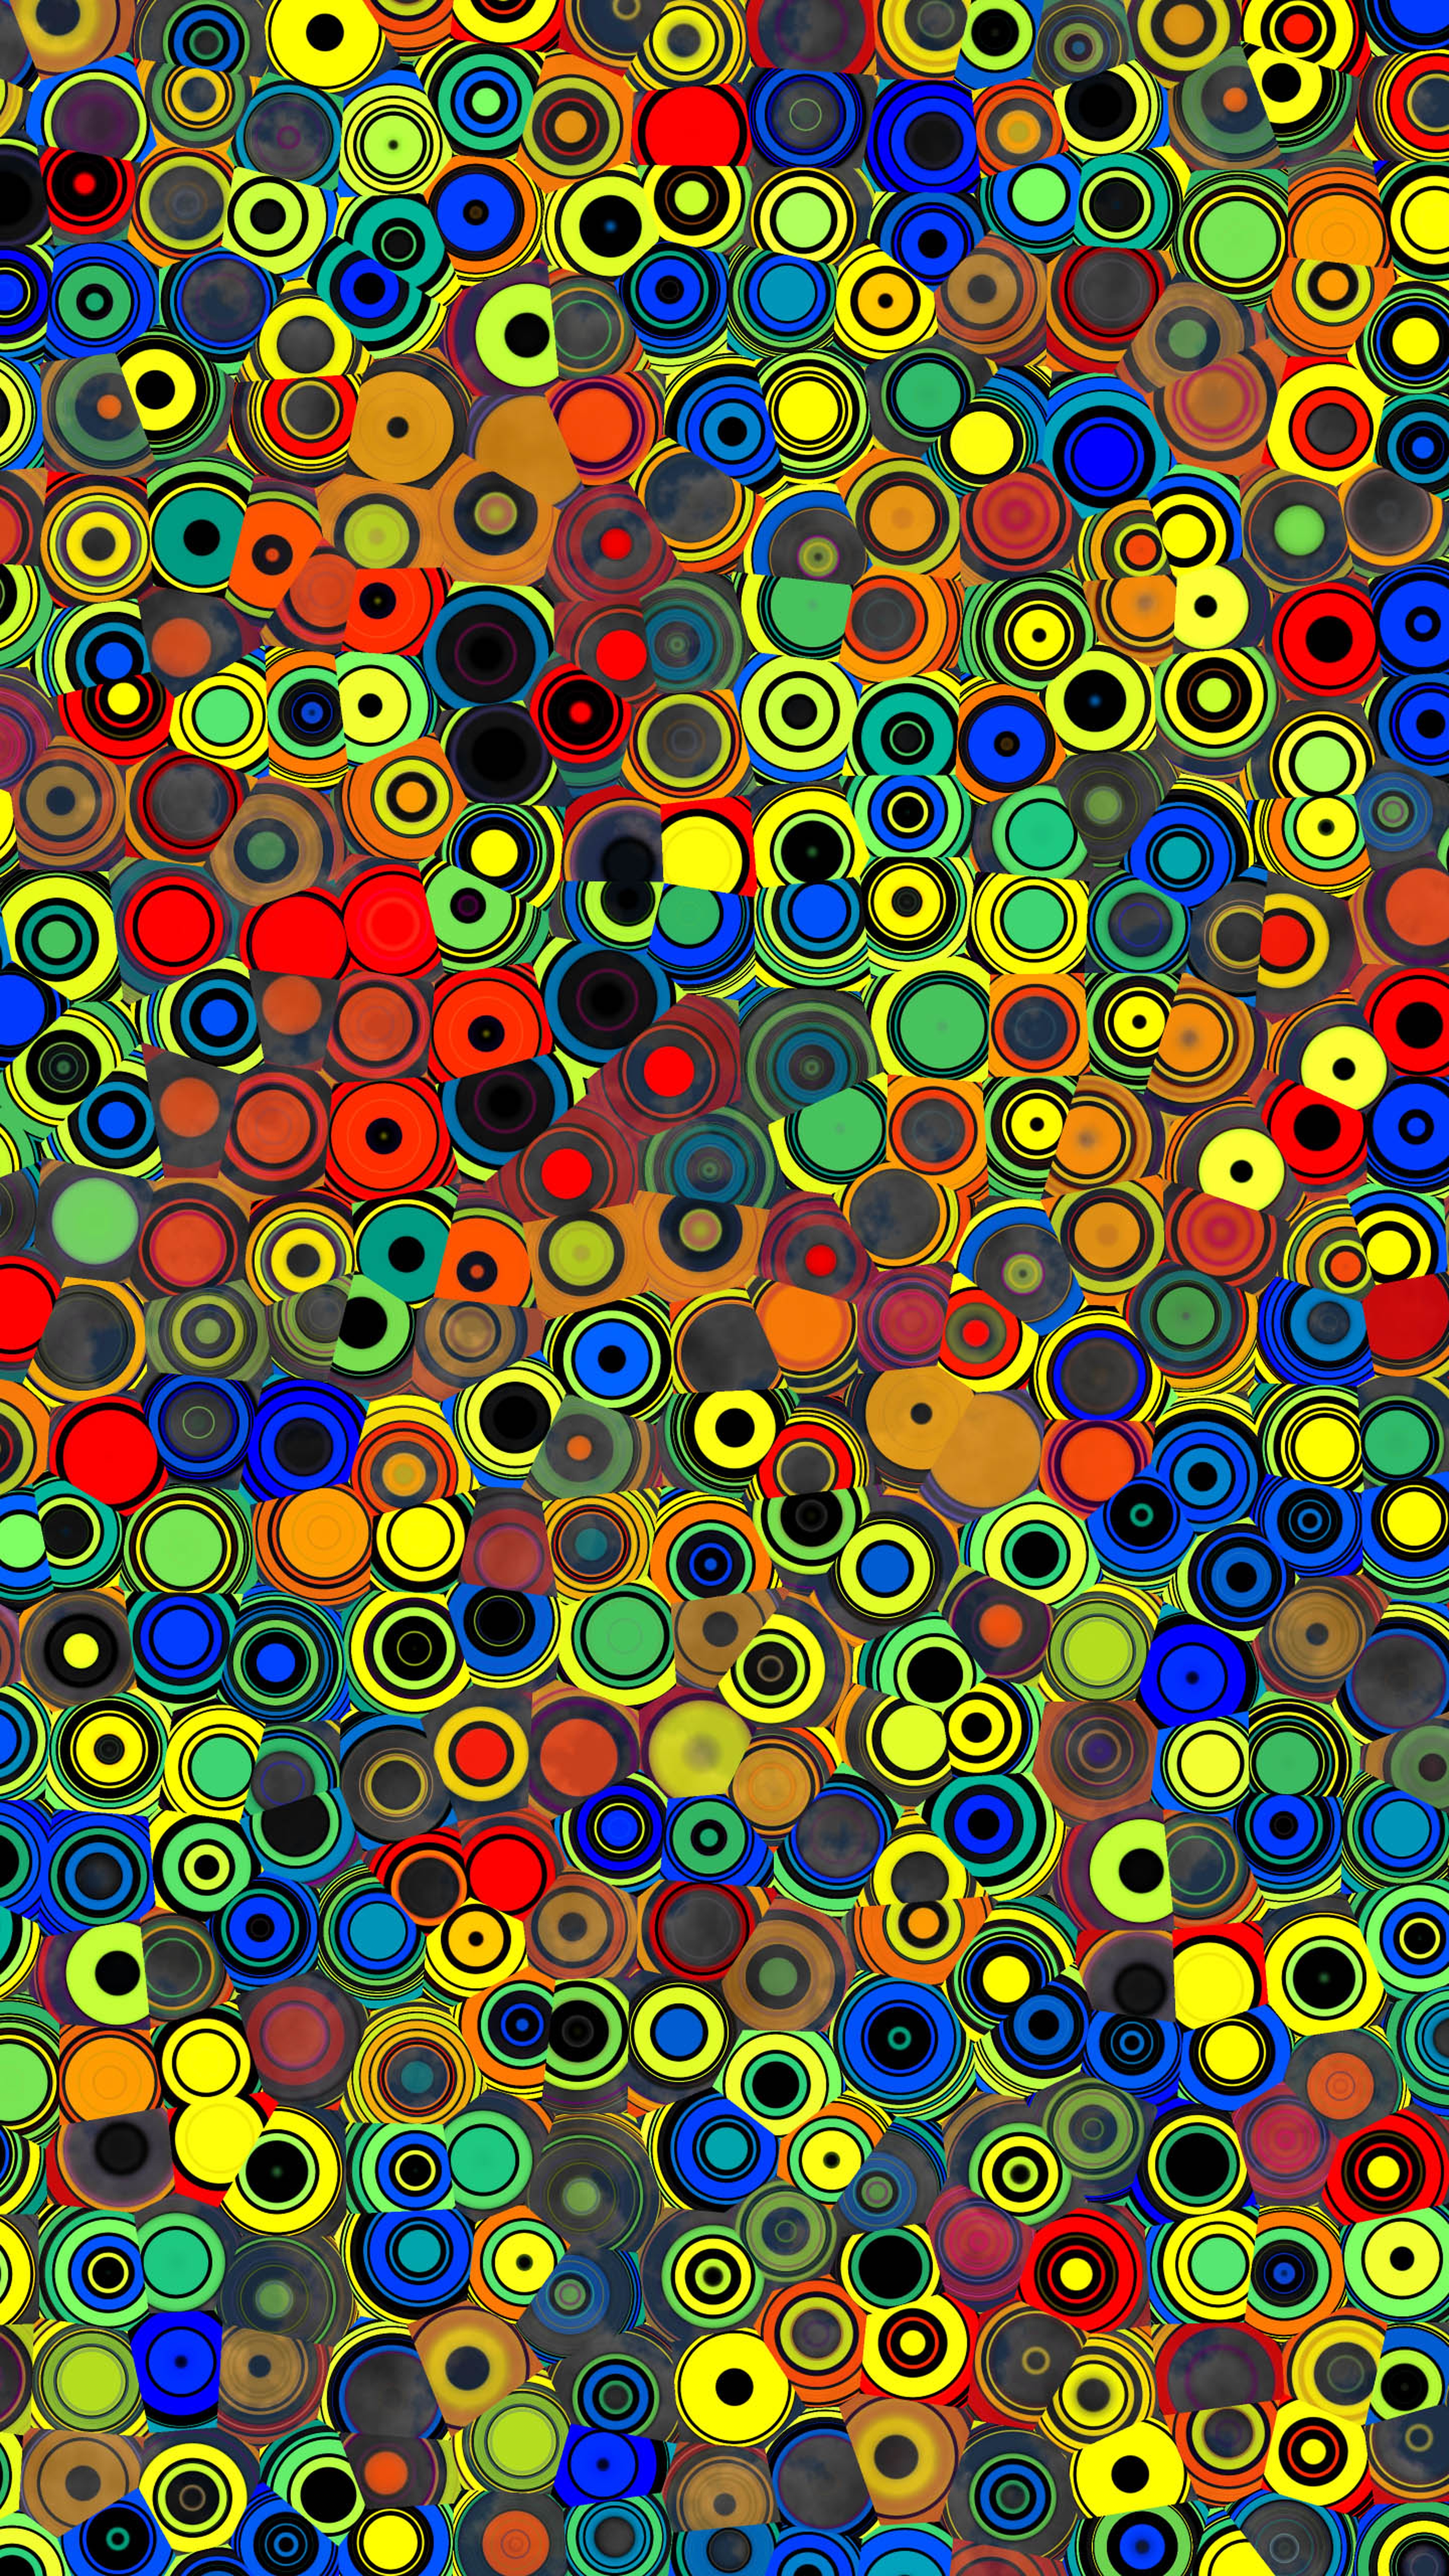 multicolored, motley, pattern, circles, abstract